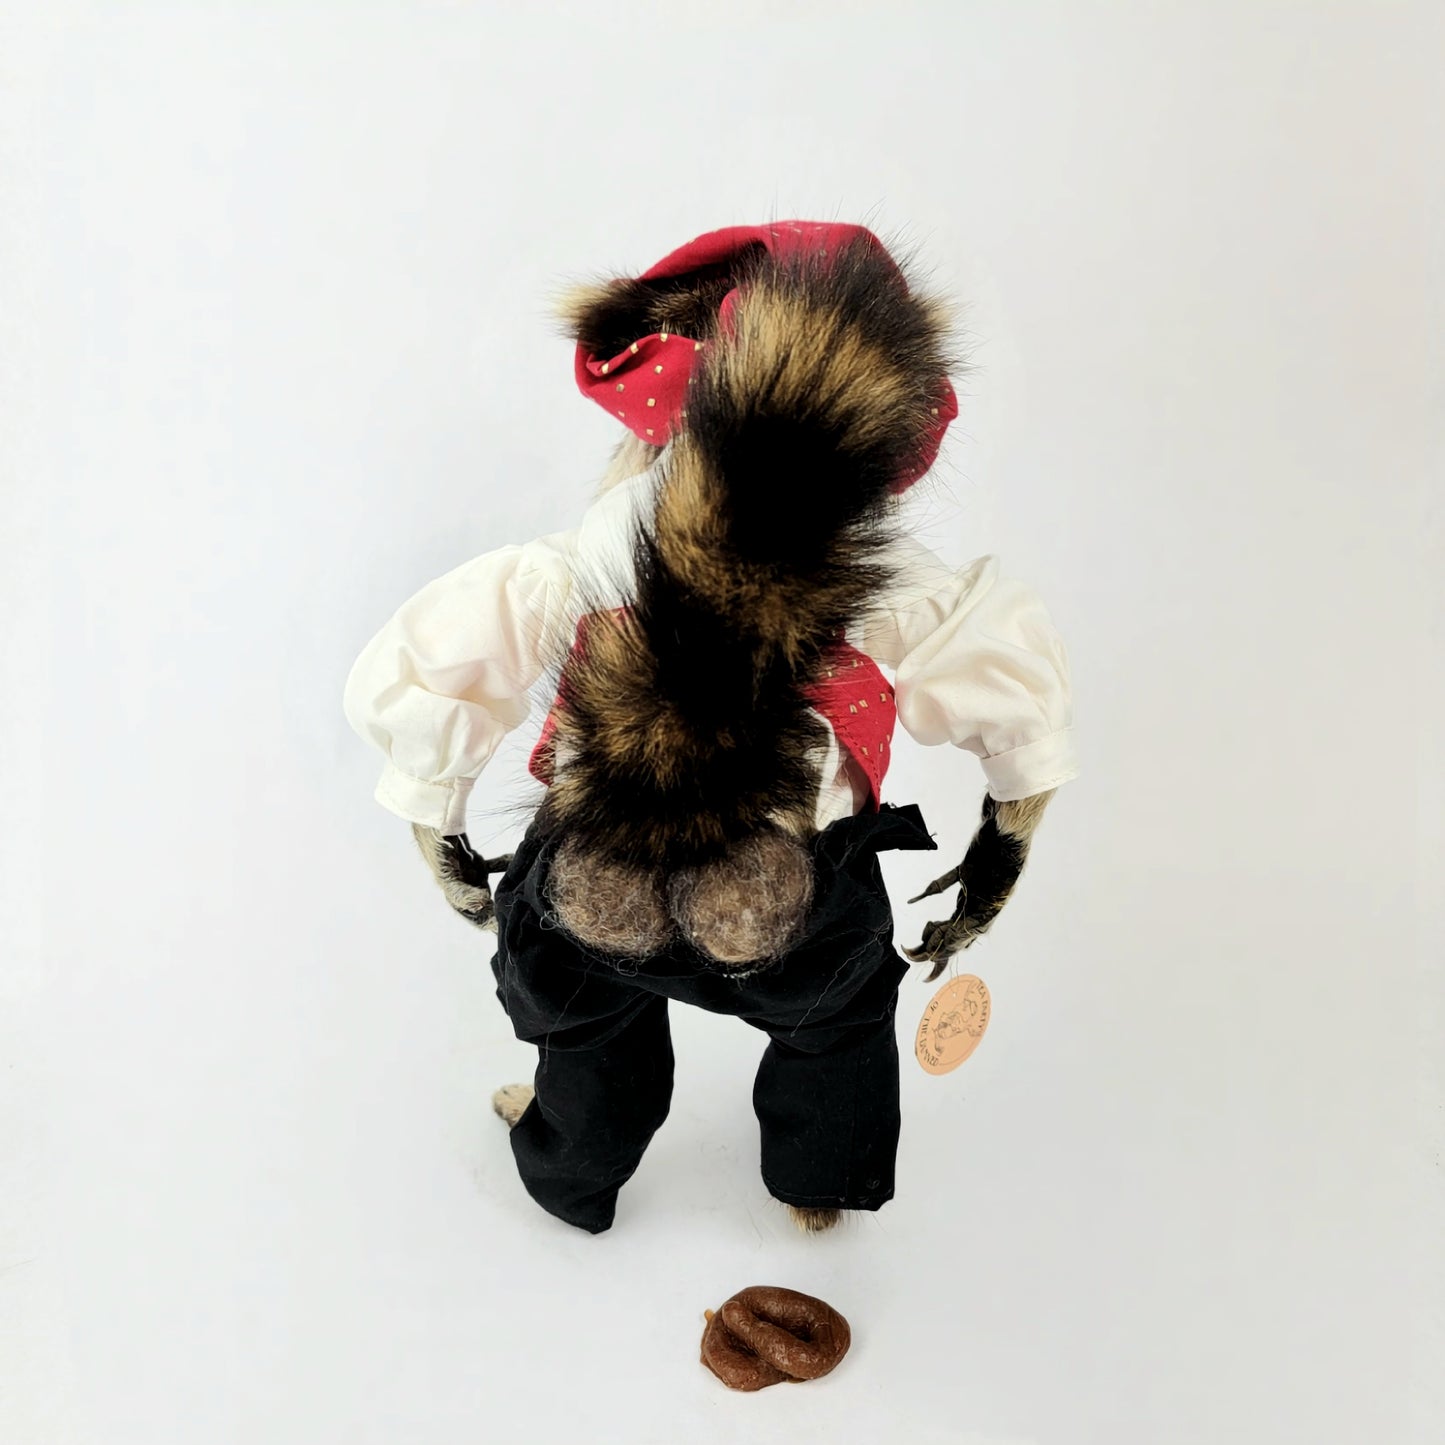 The Caganer